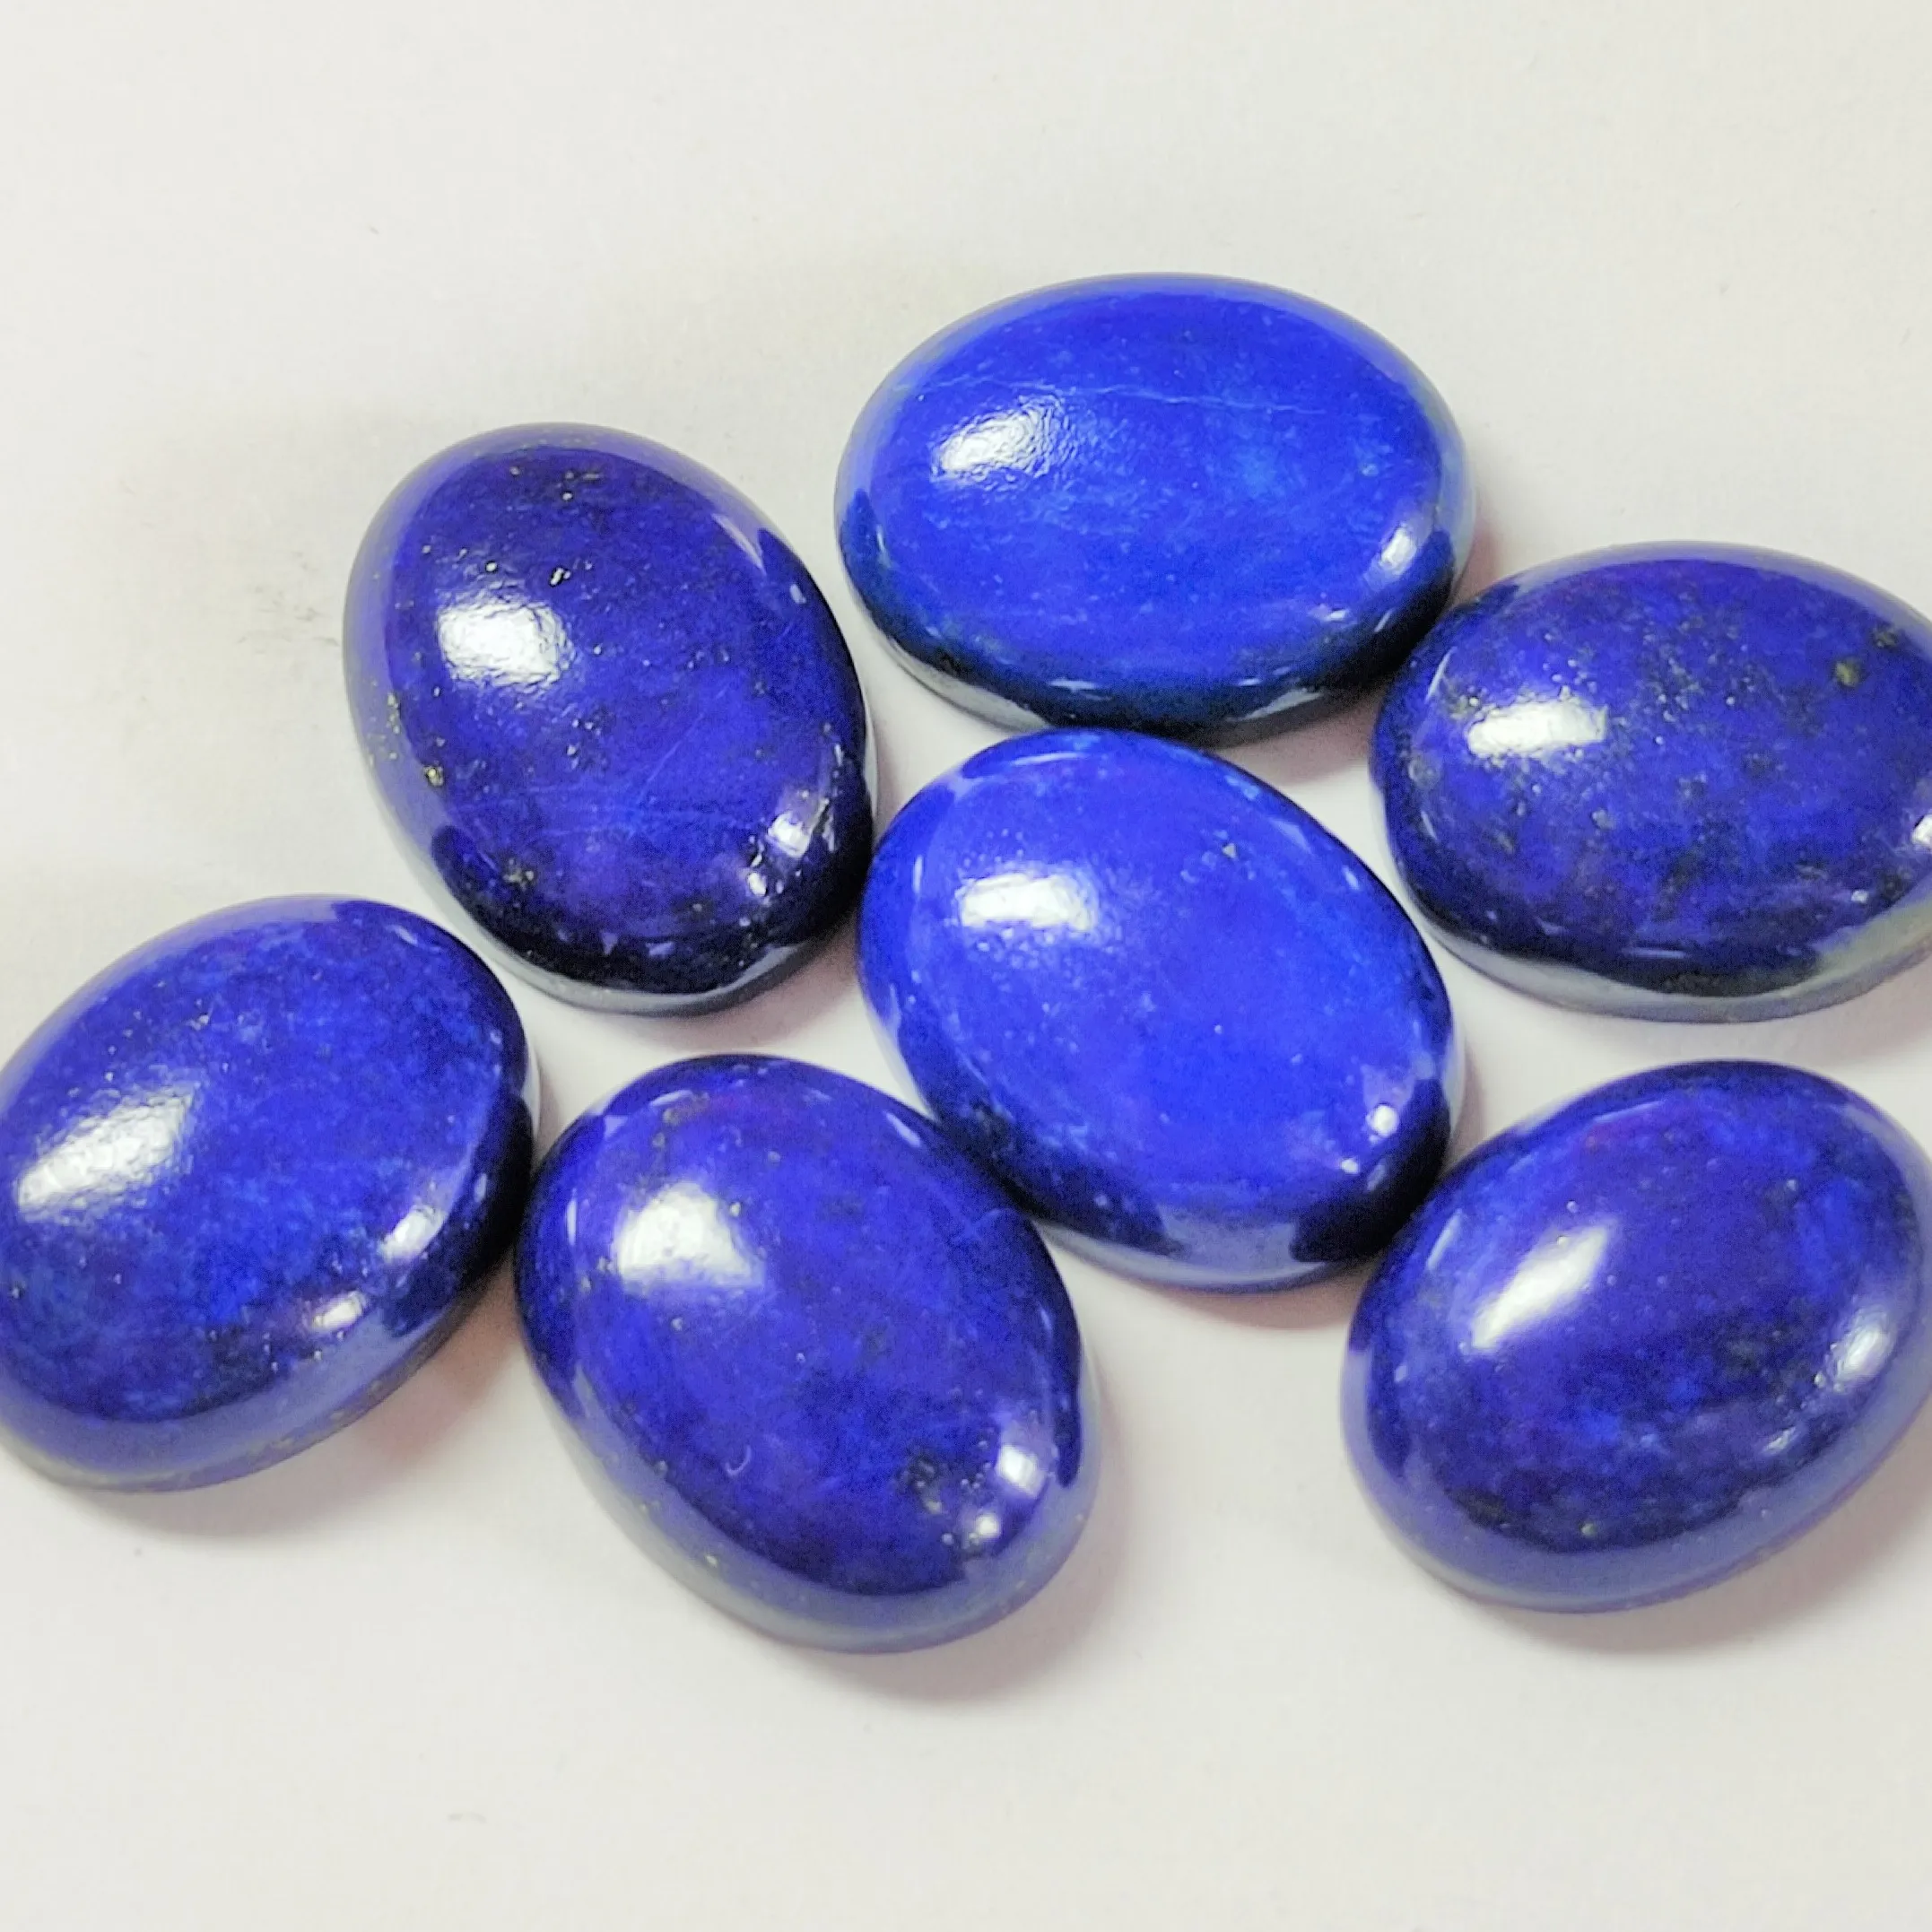 Natural Blue Lapis Lazuli Oval Shape Smooth Cabochon Loose Gemstone For Jewelry Making At Wholesale Price